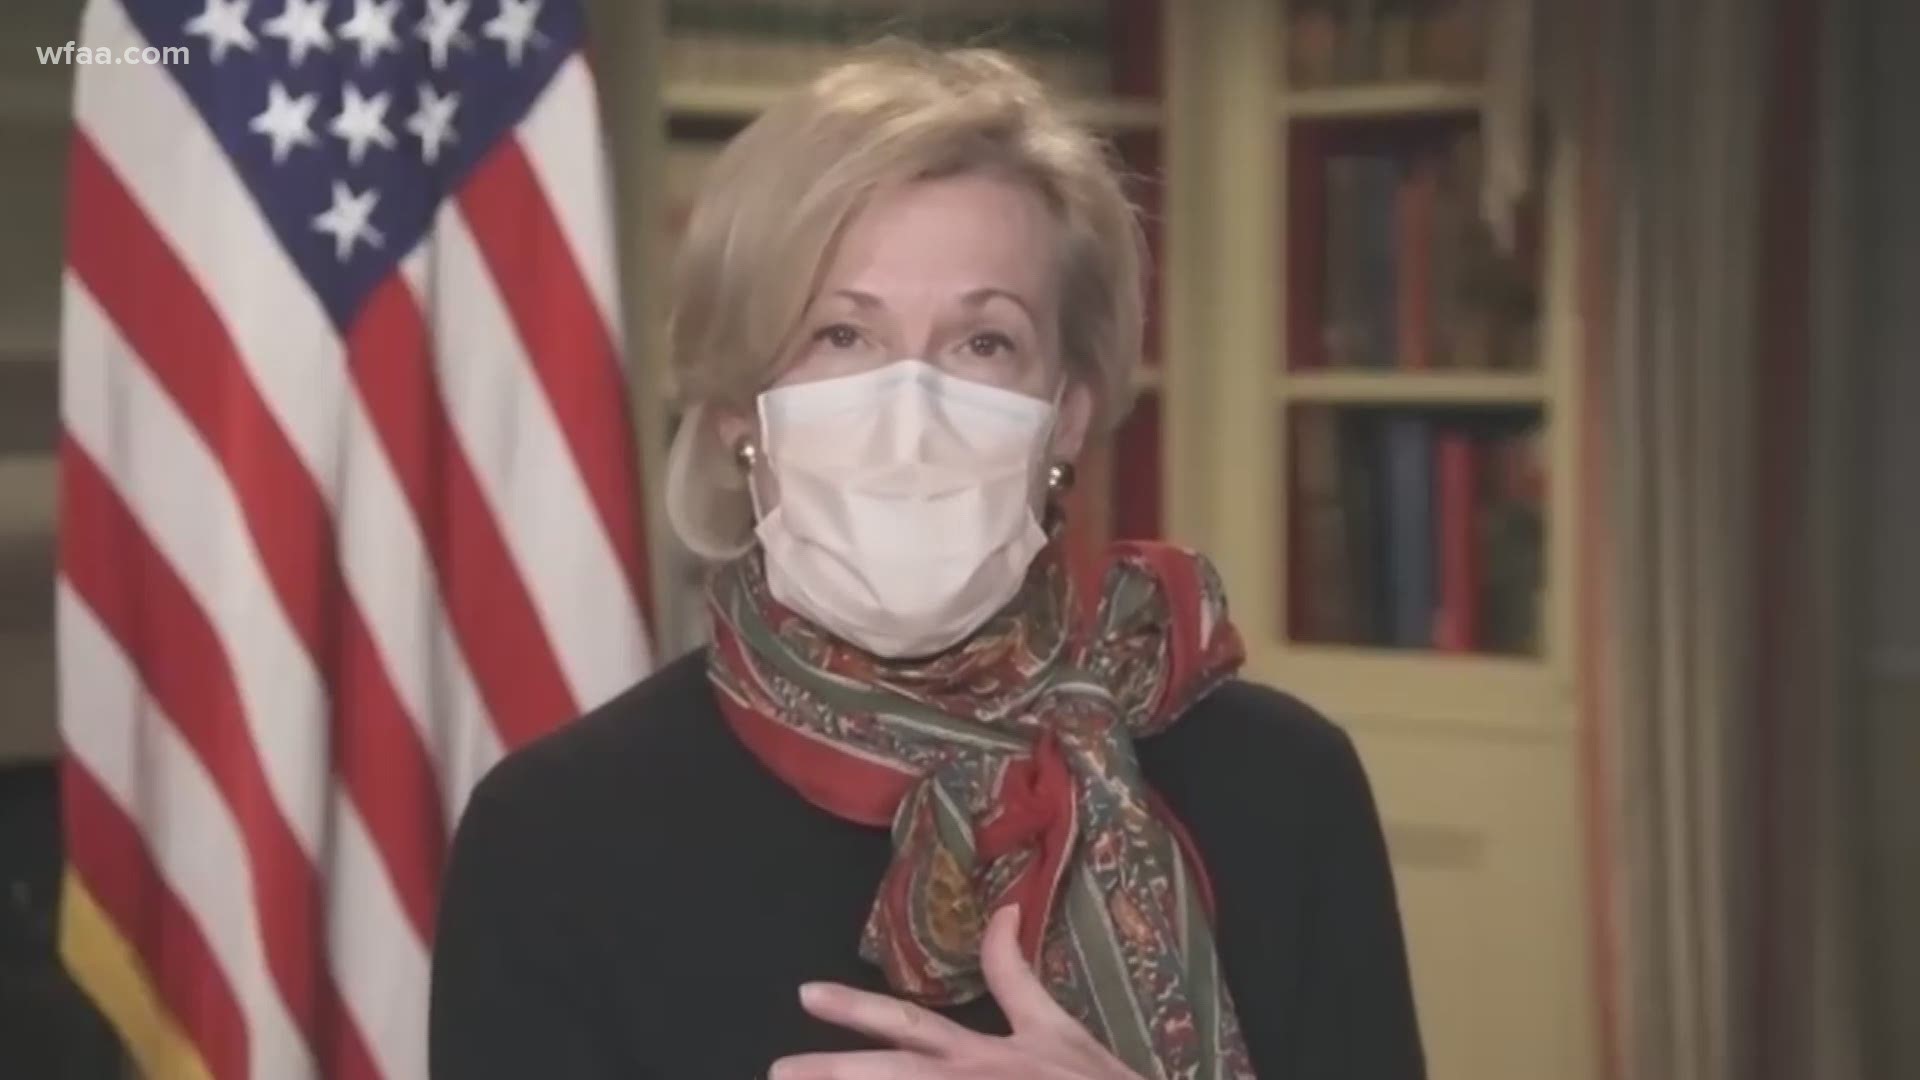 Dr. Birx spoke with WFAA Tuesday in a wide ranging interview covering everything from the vaccination rollout to her thoughts on the state of the virus in Texas.